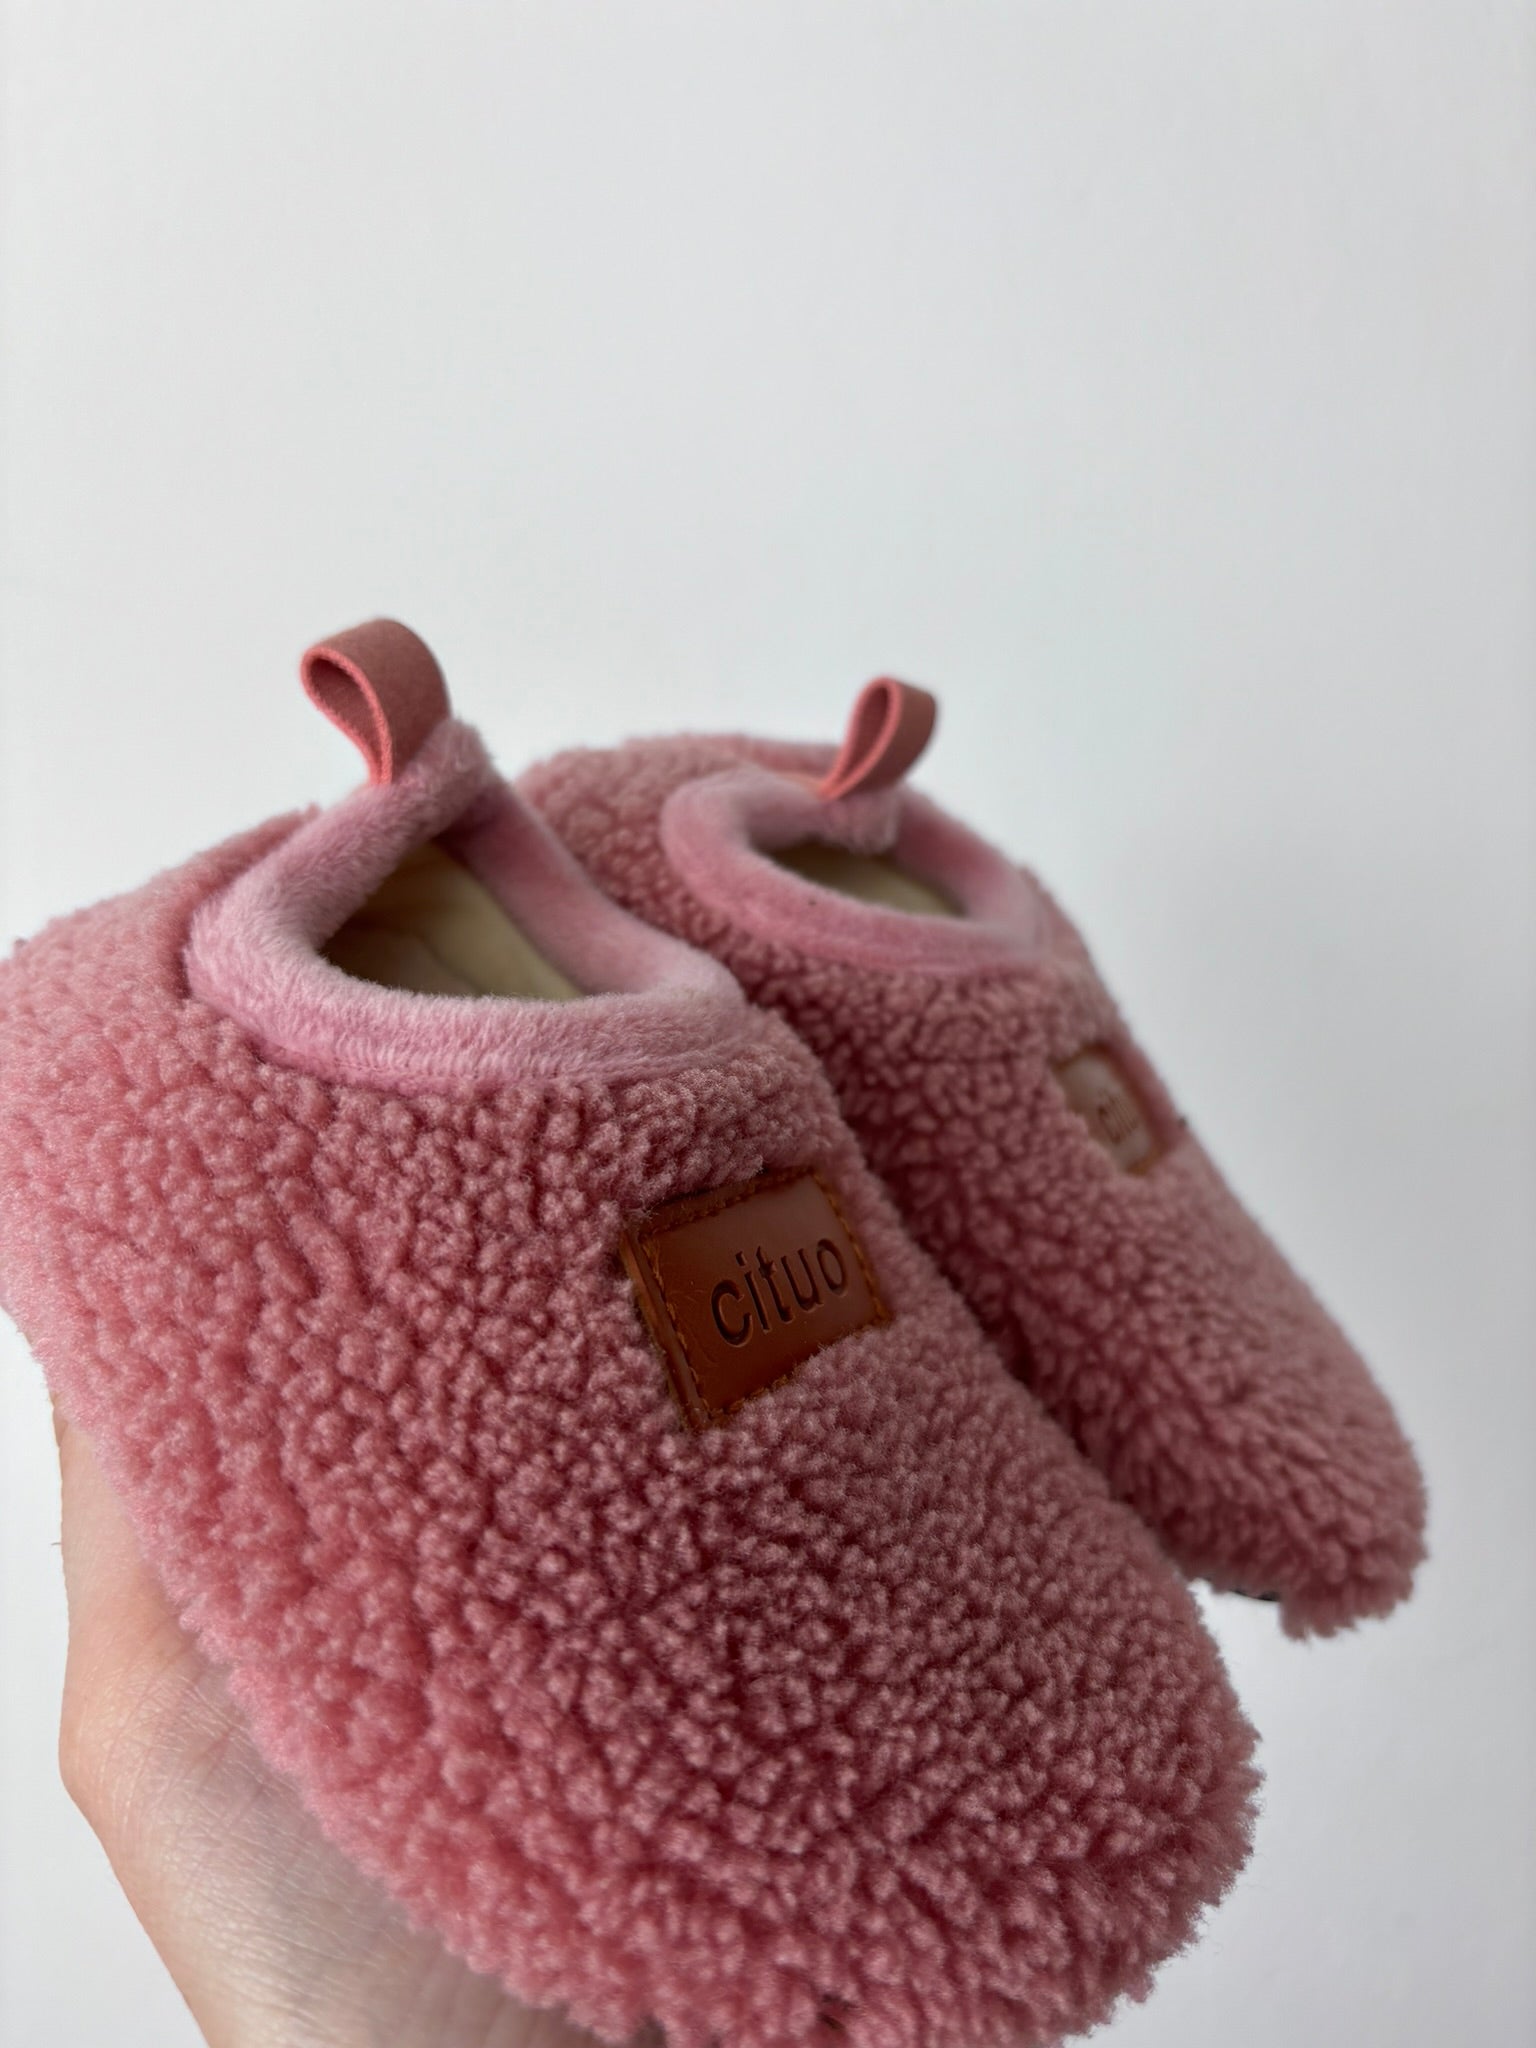 Cituo EU 24/25 UK 7-8-Slippers-Second Snuggle Preloved